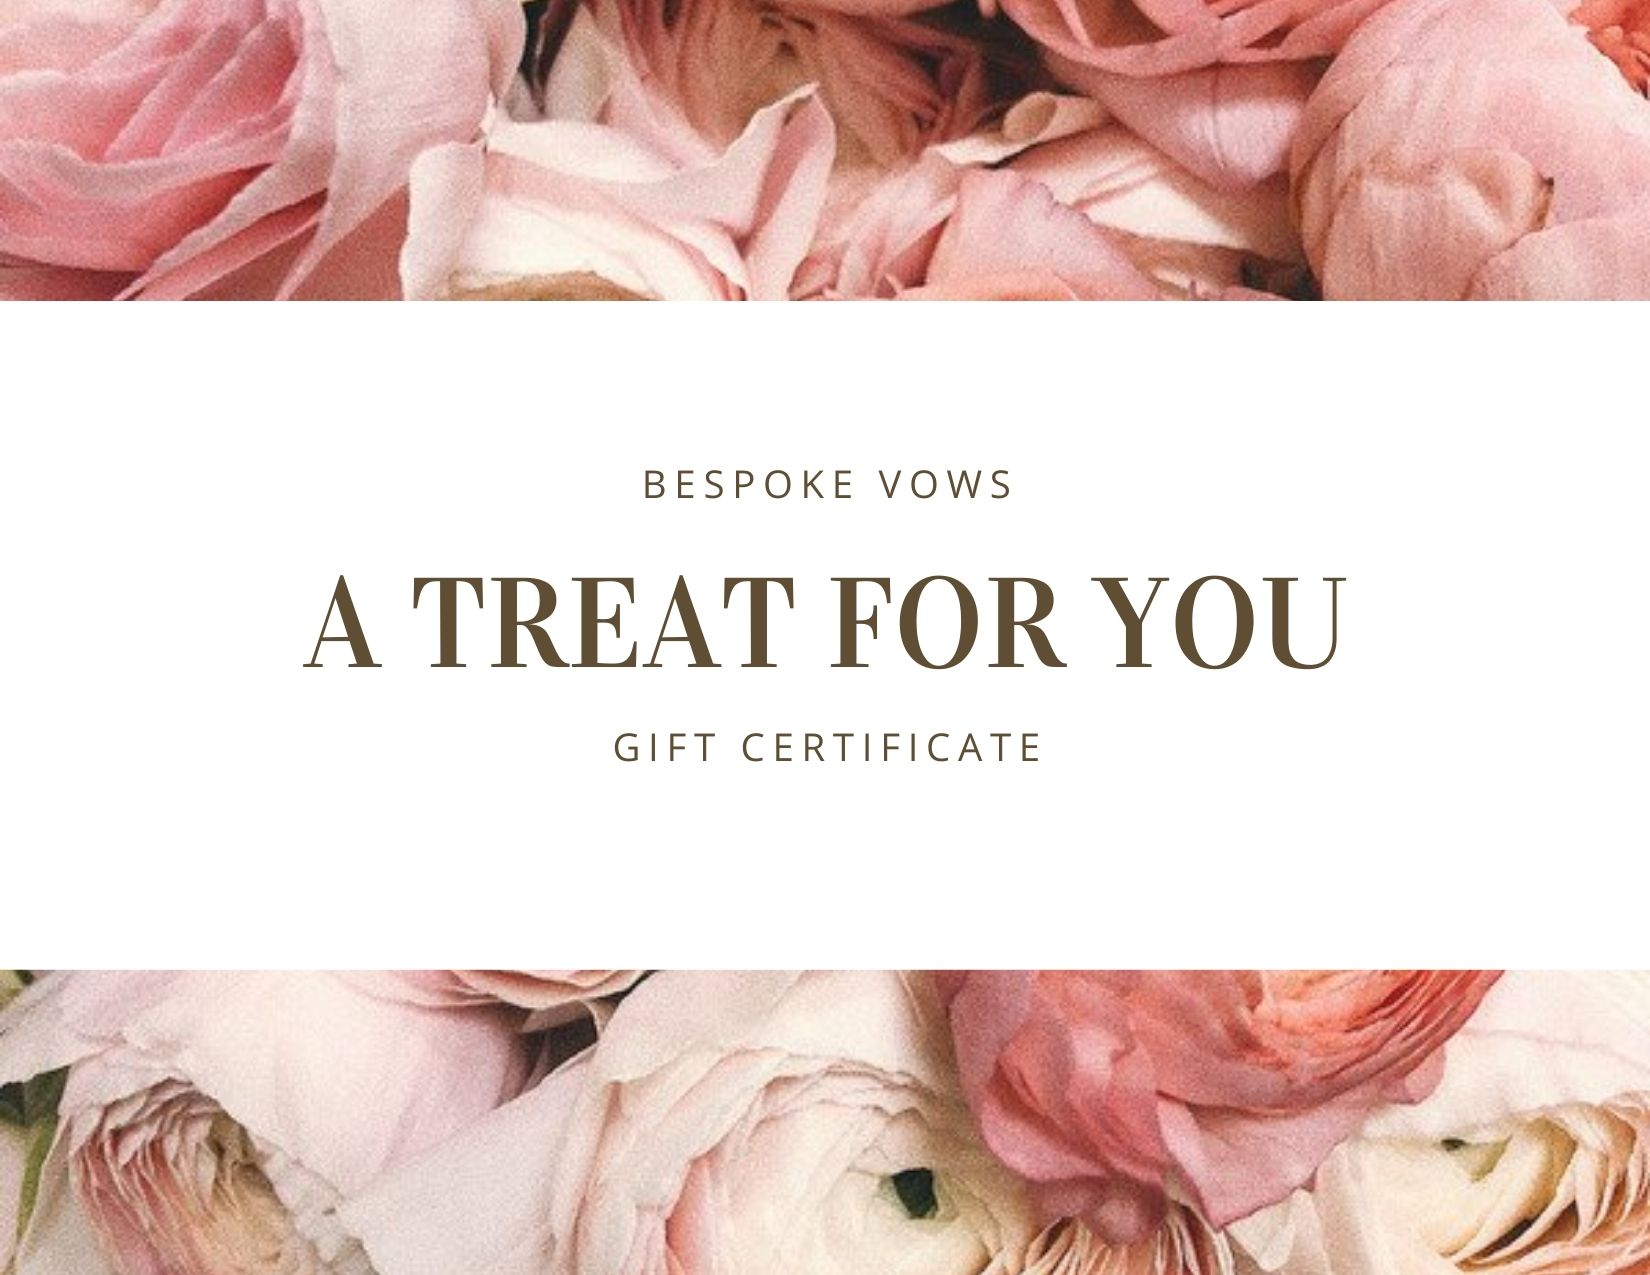 Bespoke Vows gift certificate product image with roses.